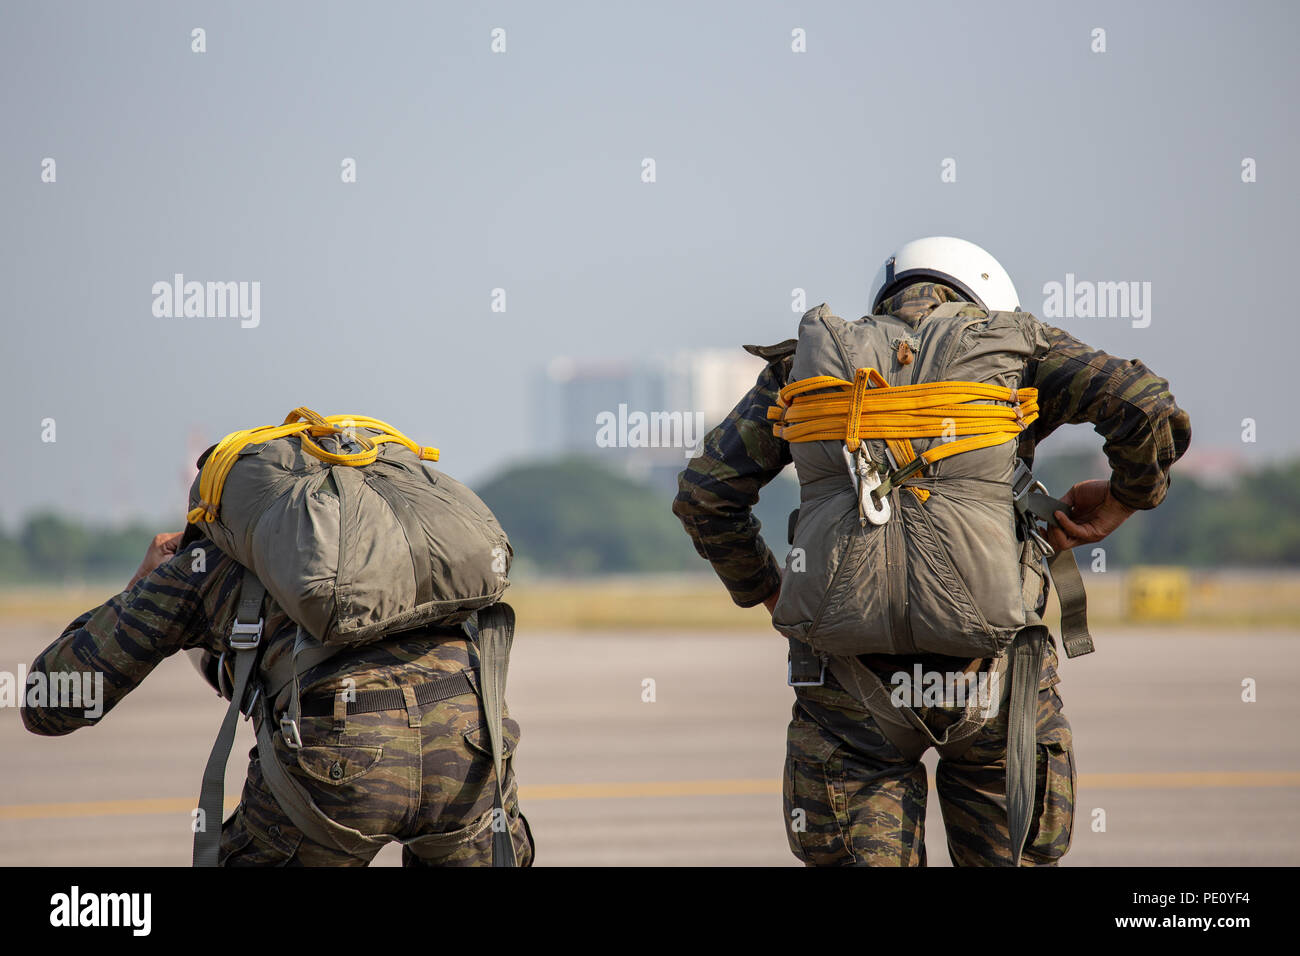 Police paratrooper in camouflage uniform and helmet are checking T-10 static line parachute harness and equipment  for safety before tactical jump at  Stock Photo